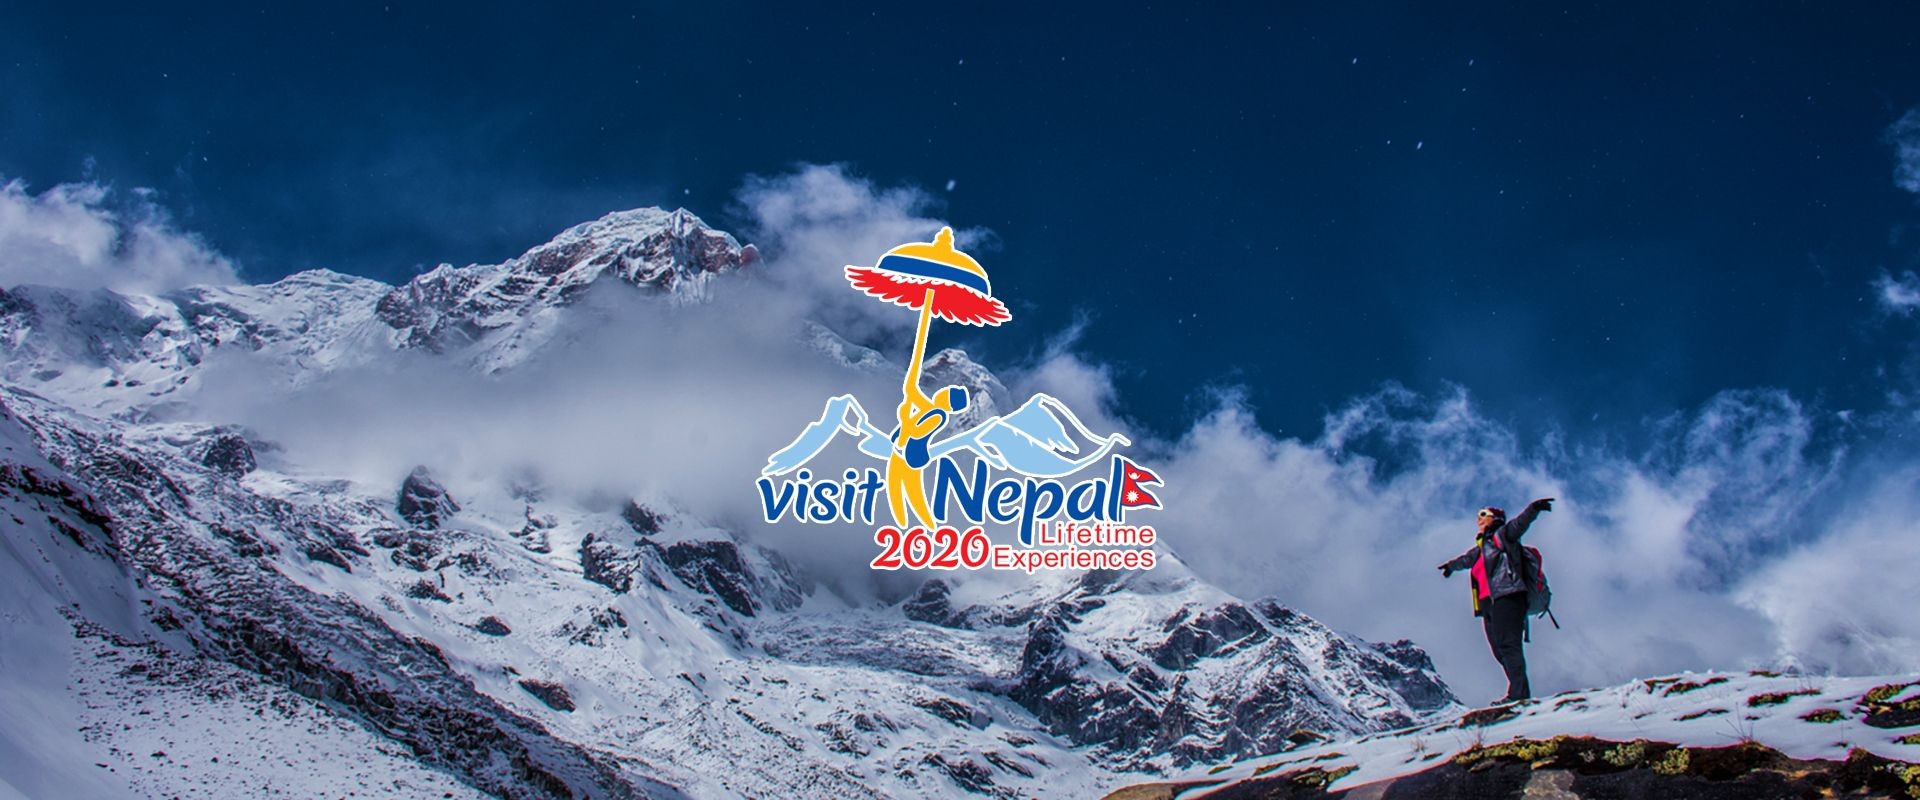 visit nepal year  ntb dmo site banner